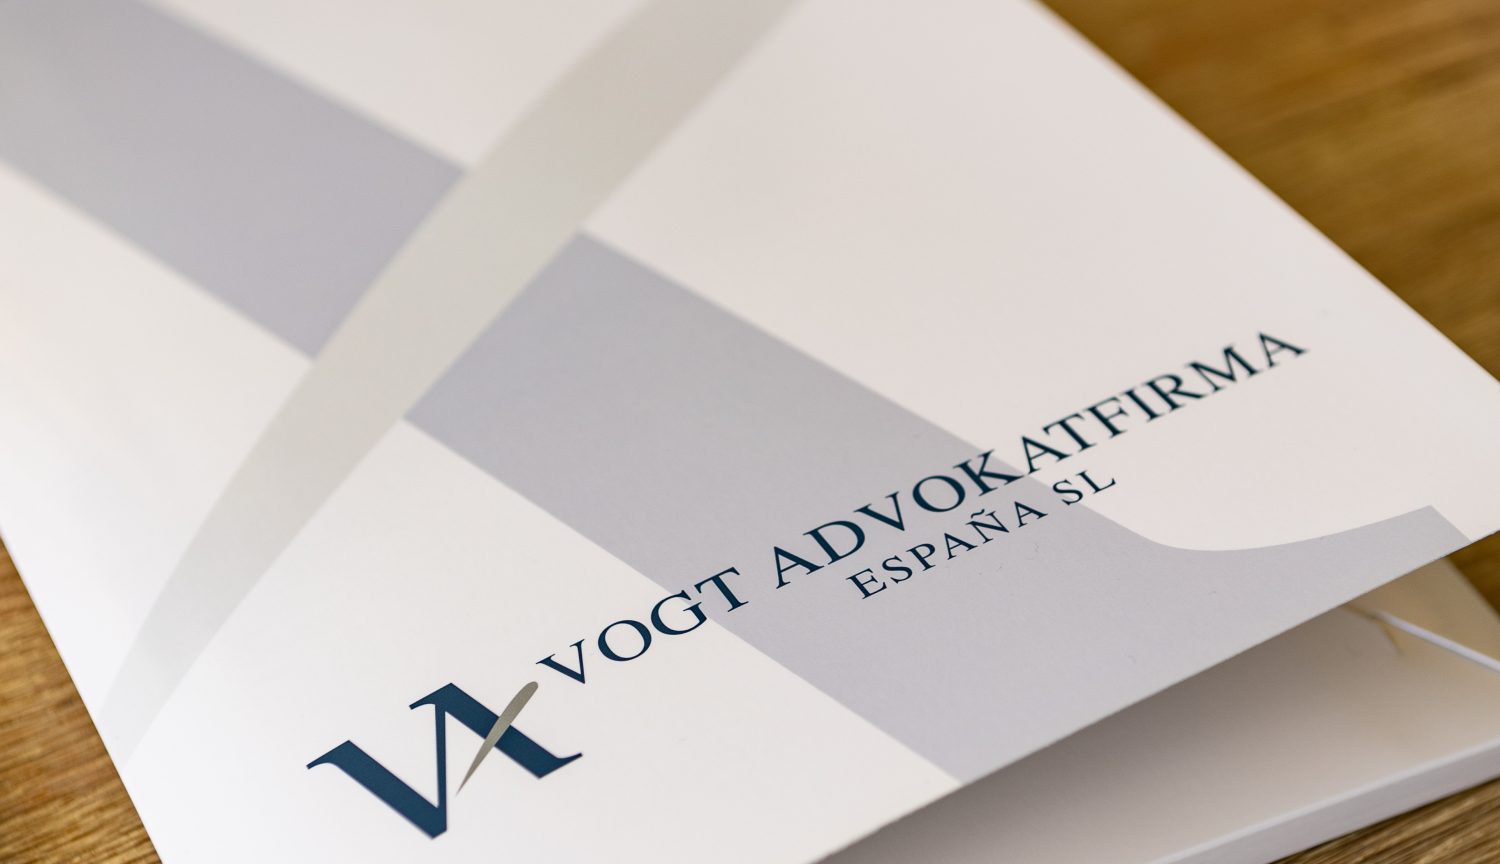 Vogt law about us